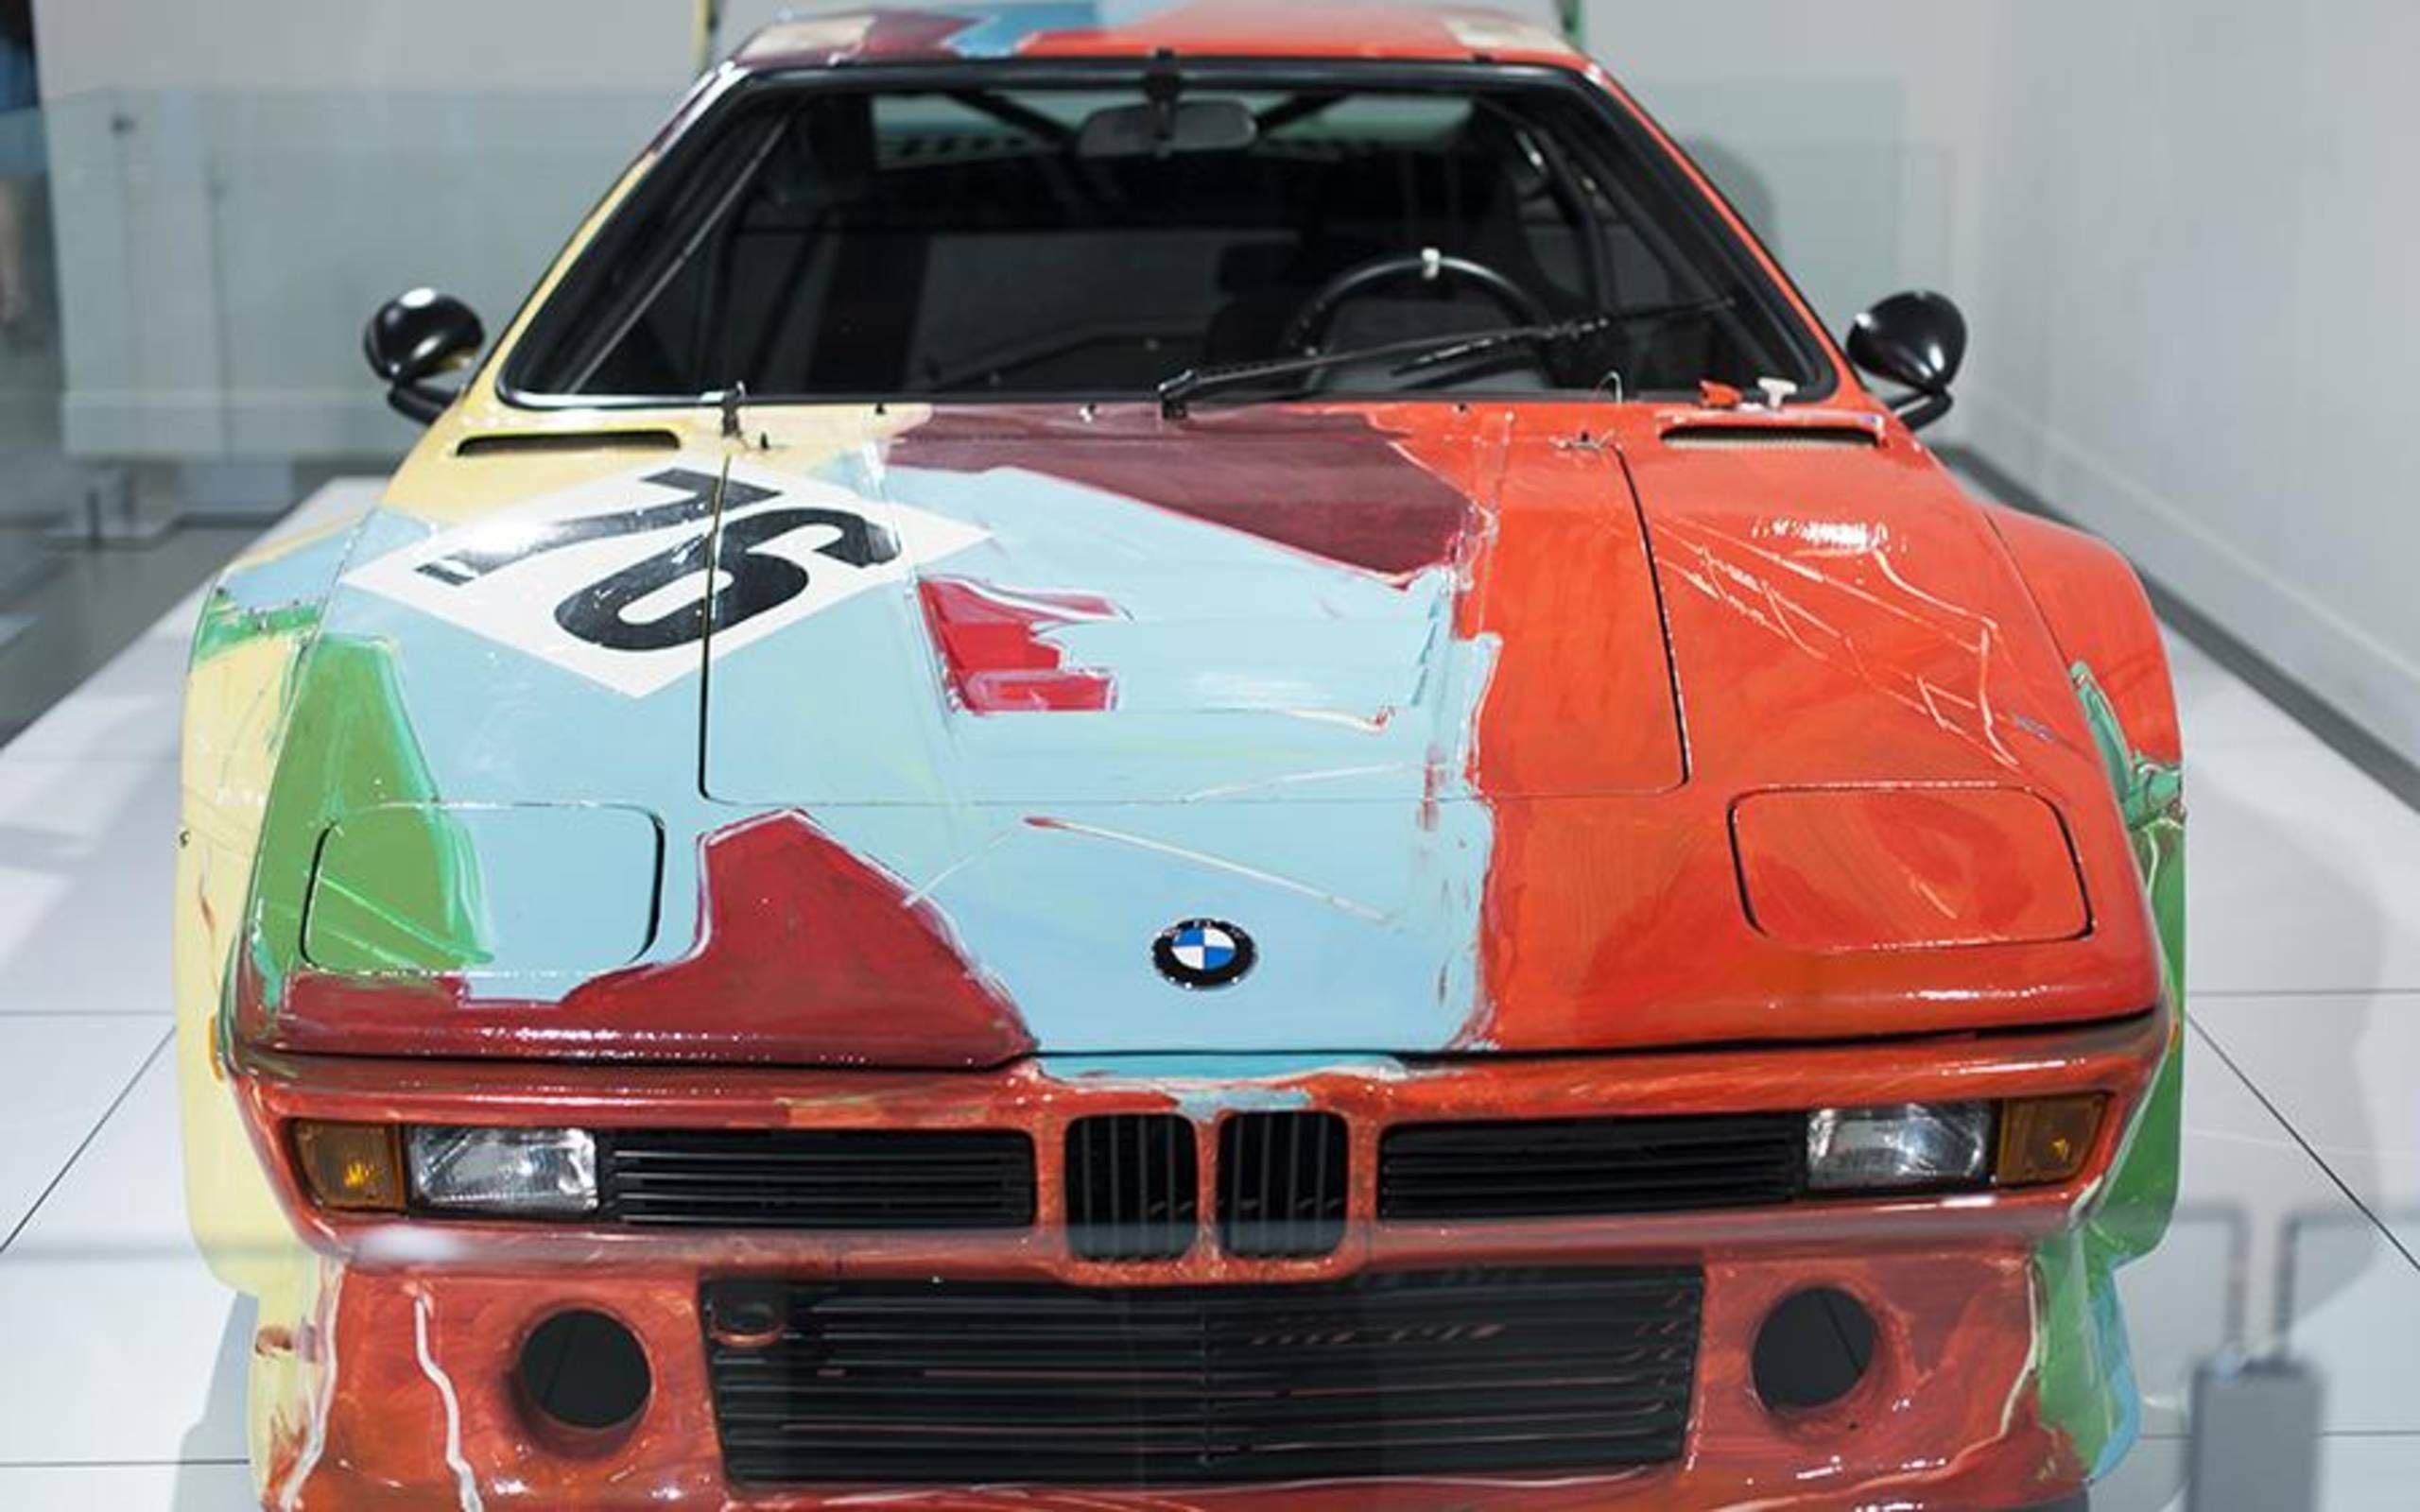 Up Close With Andy Warhol's BMW M1 Art Car